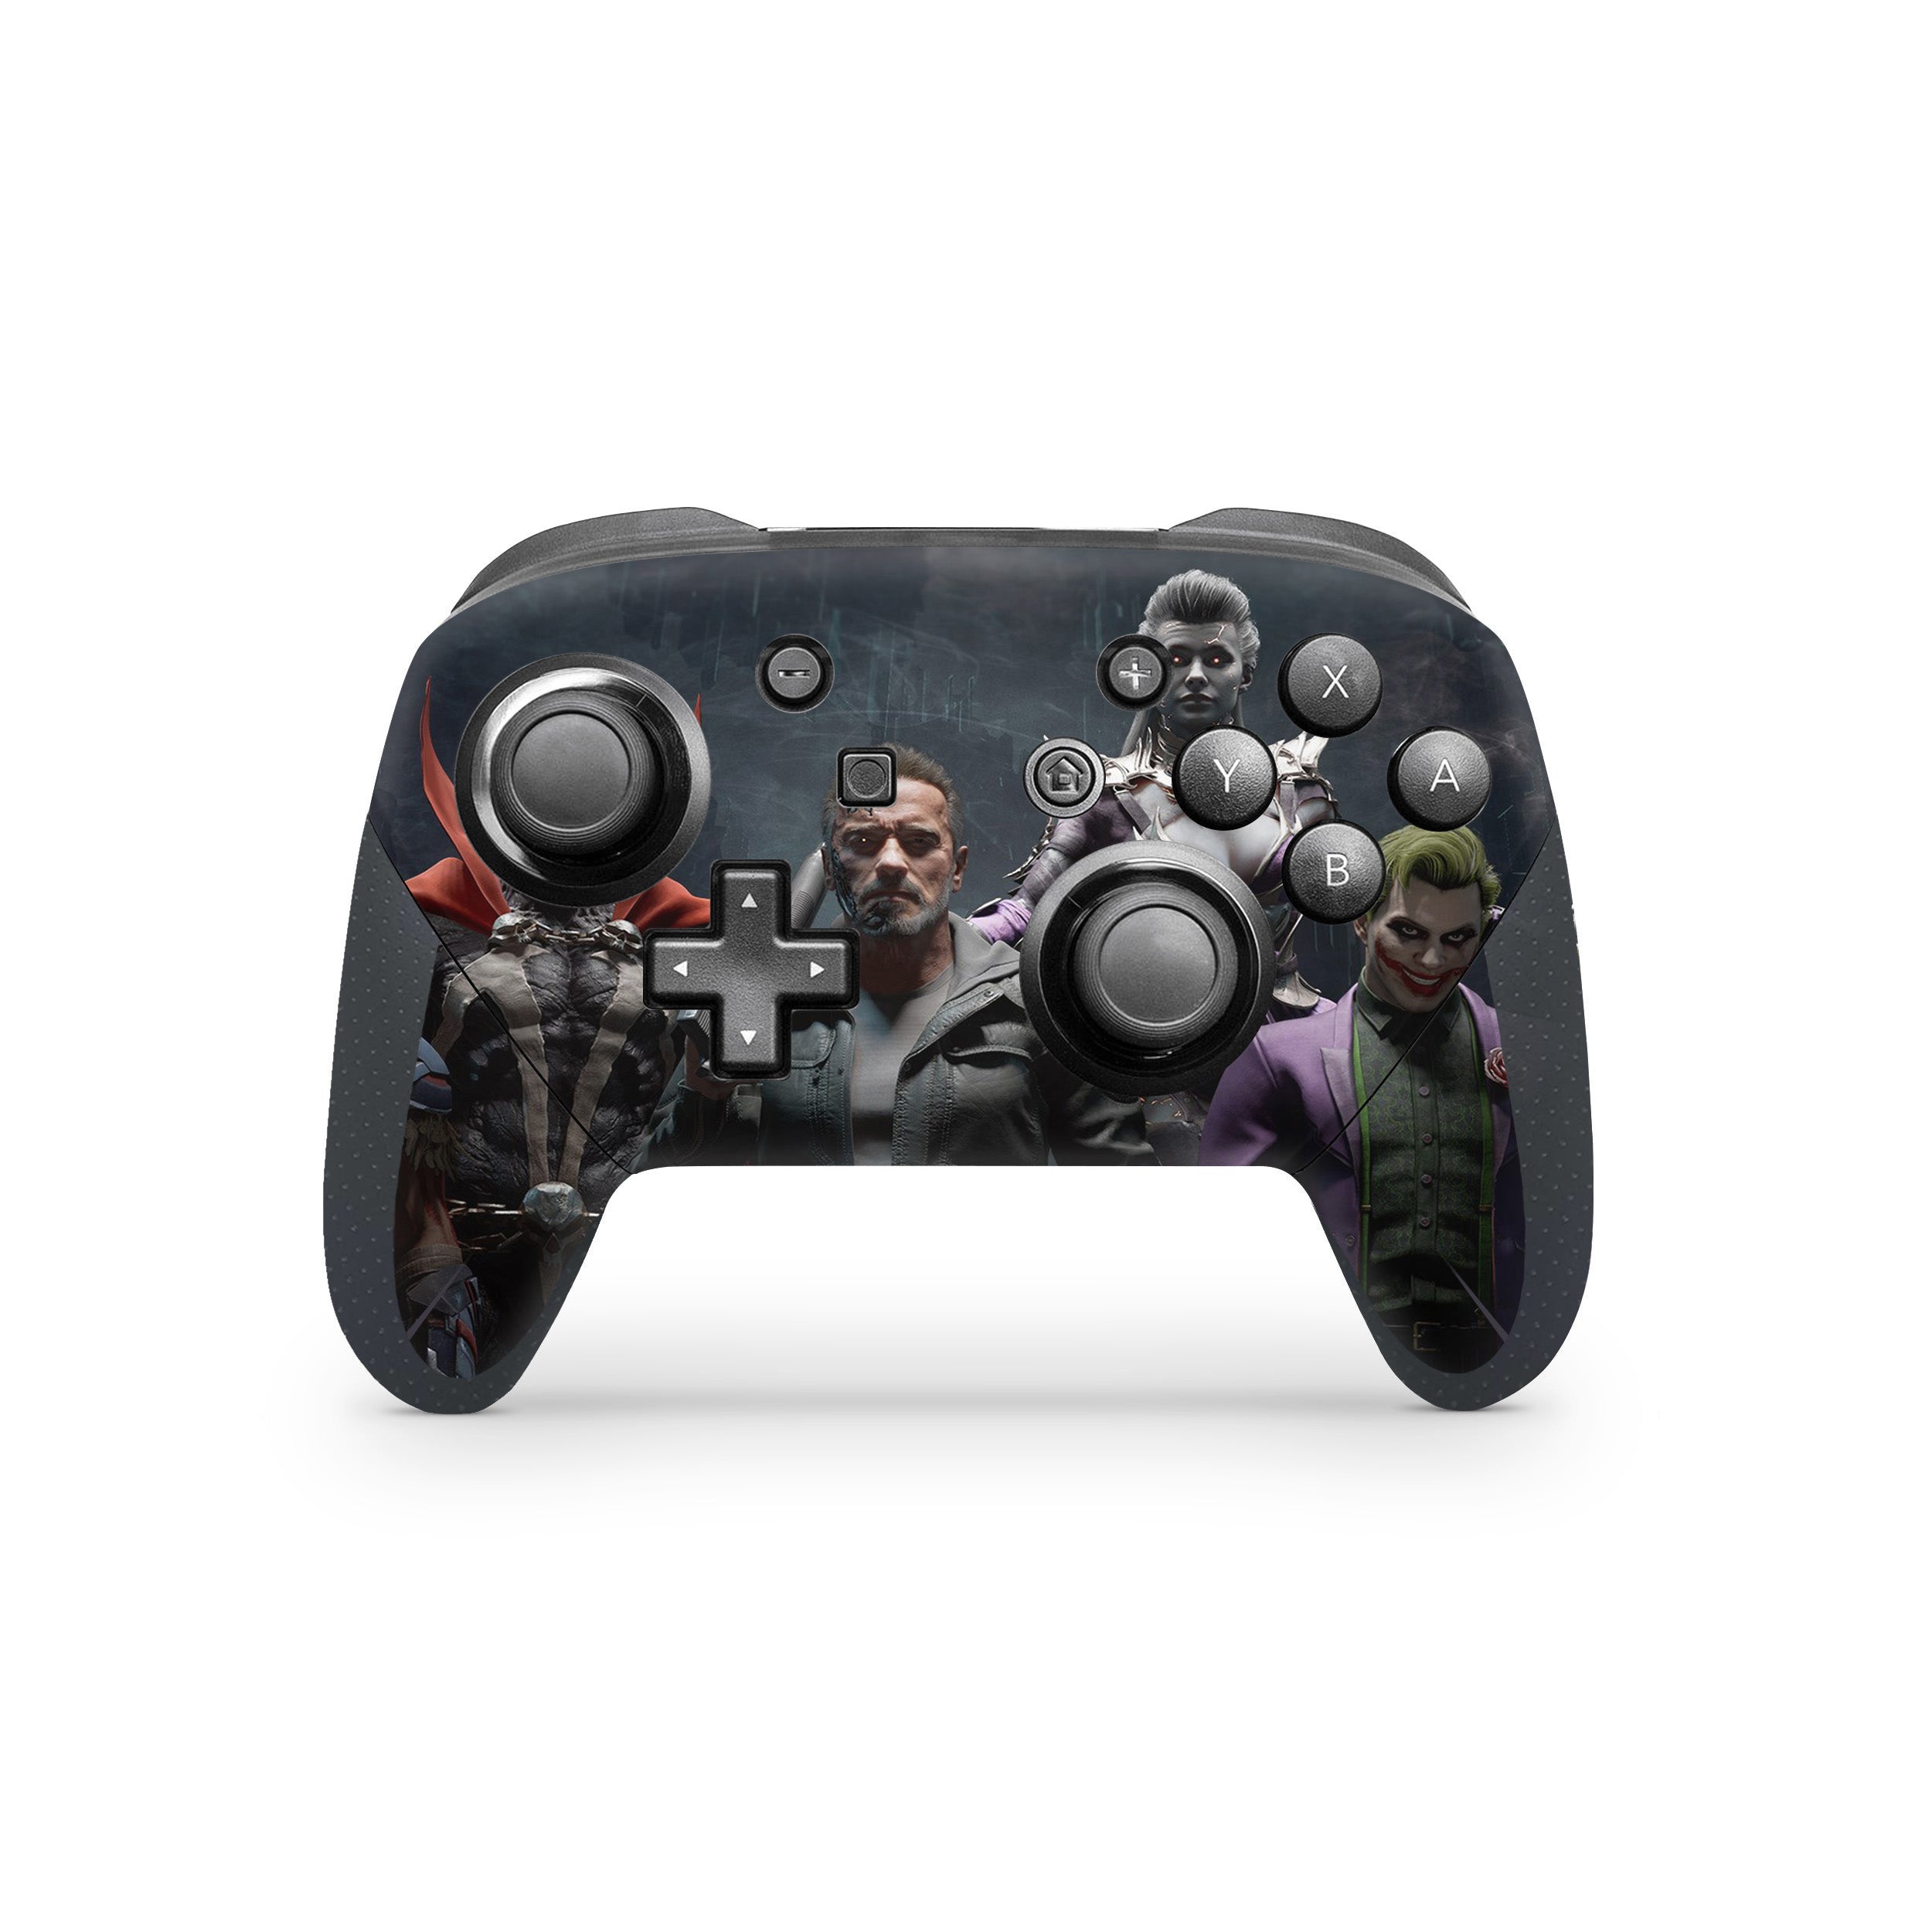 A video game skin featuring a Mortal Kombat 11 The Terminator design for the Switch Pro Controller.